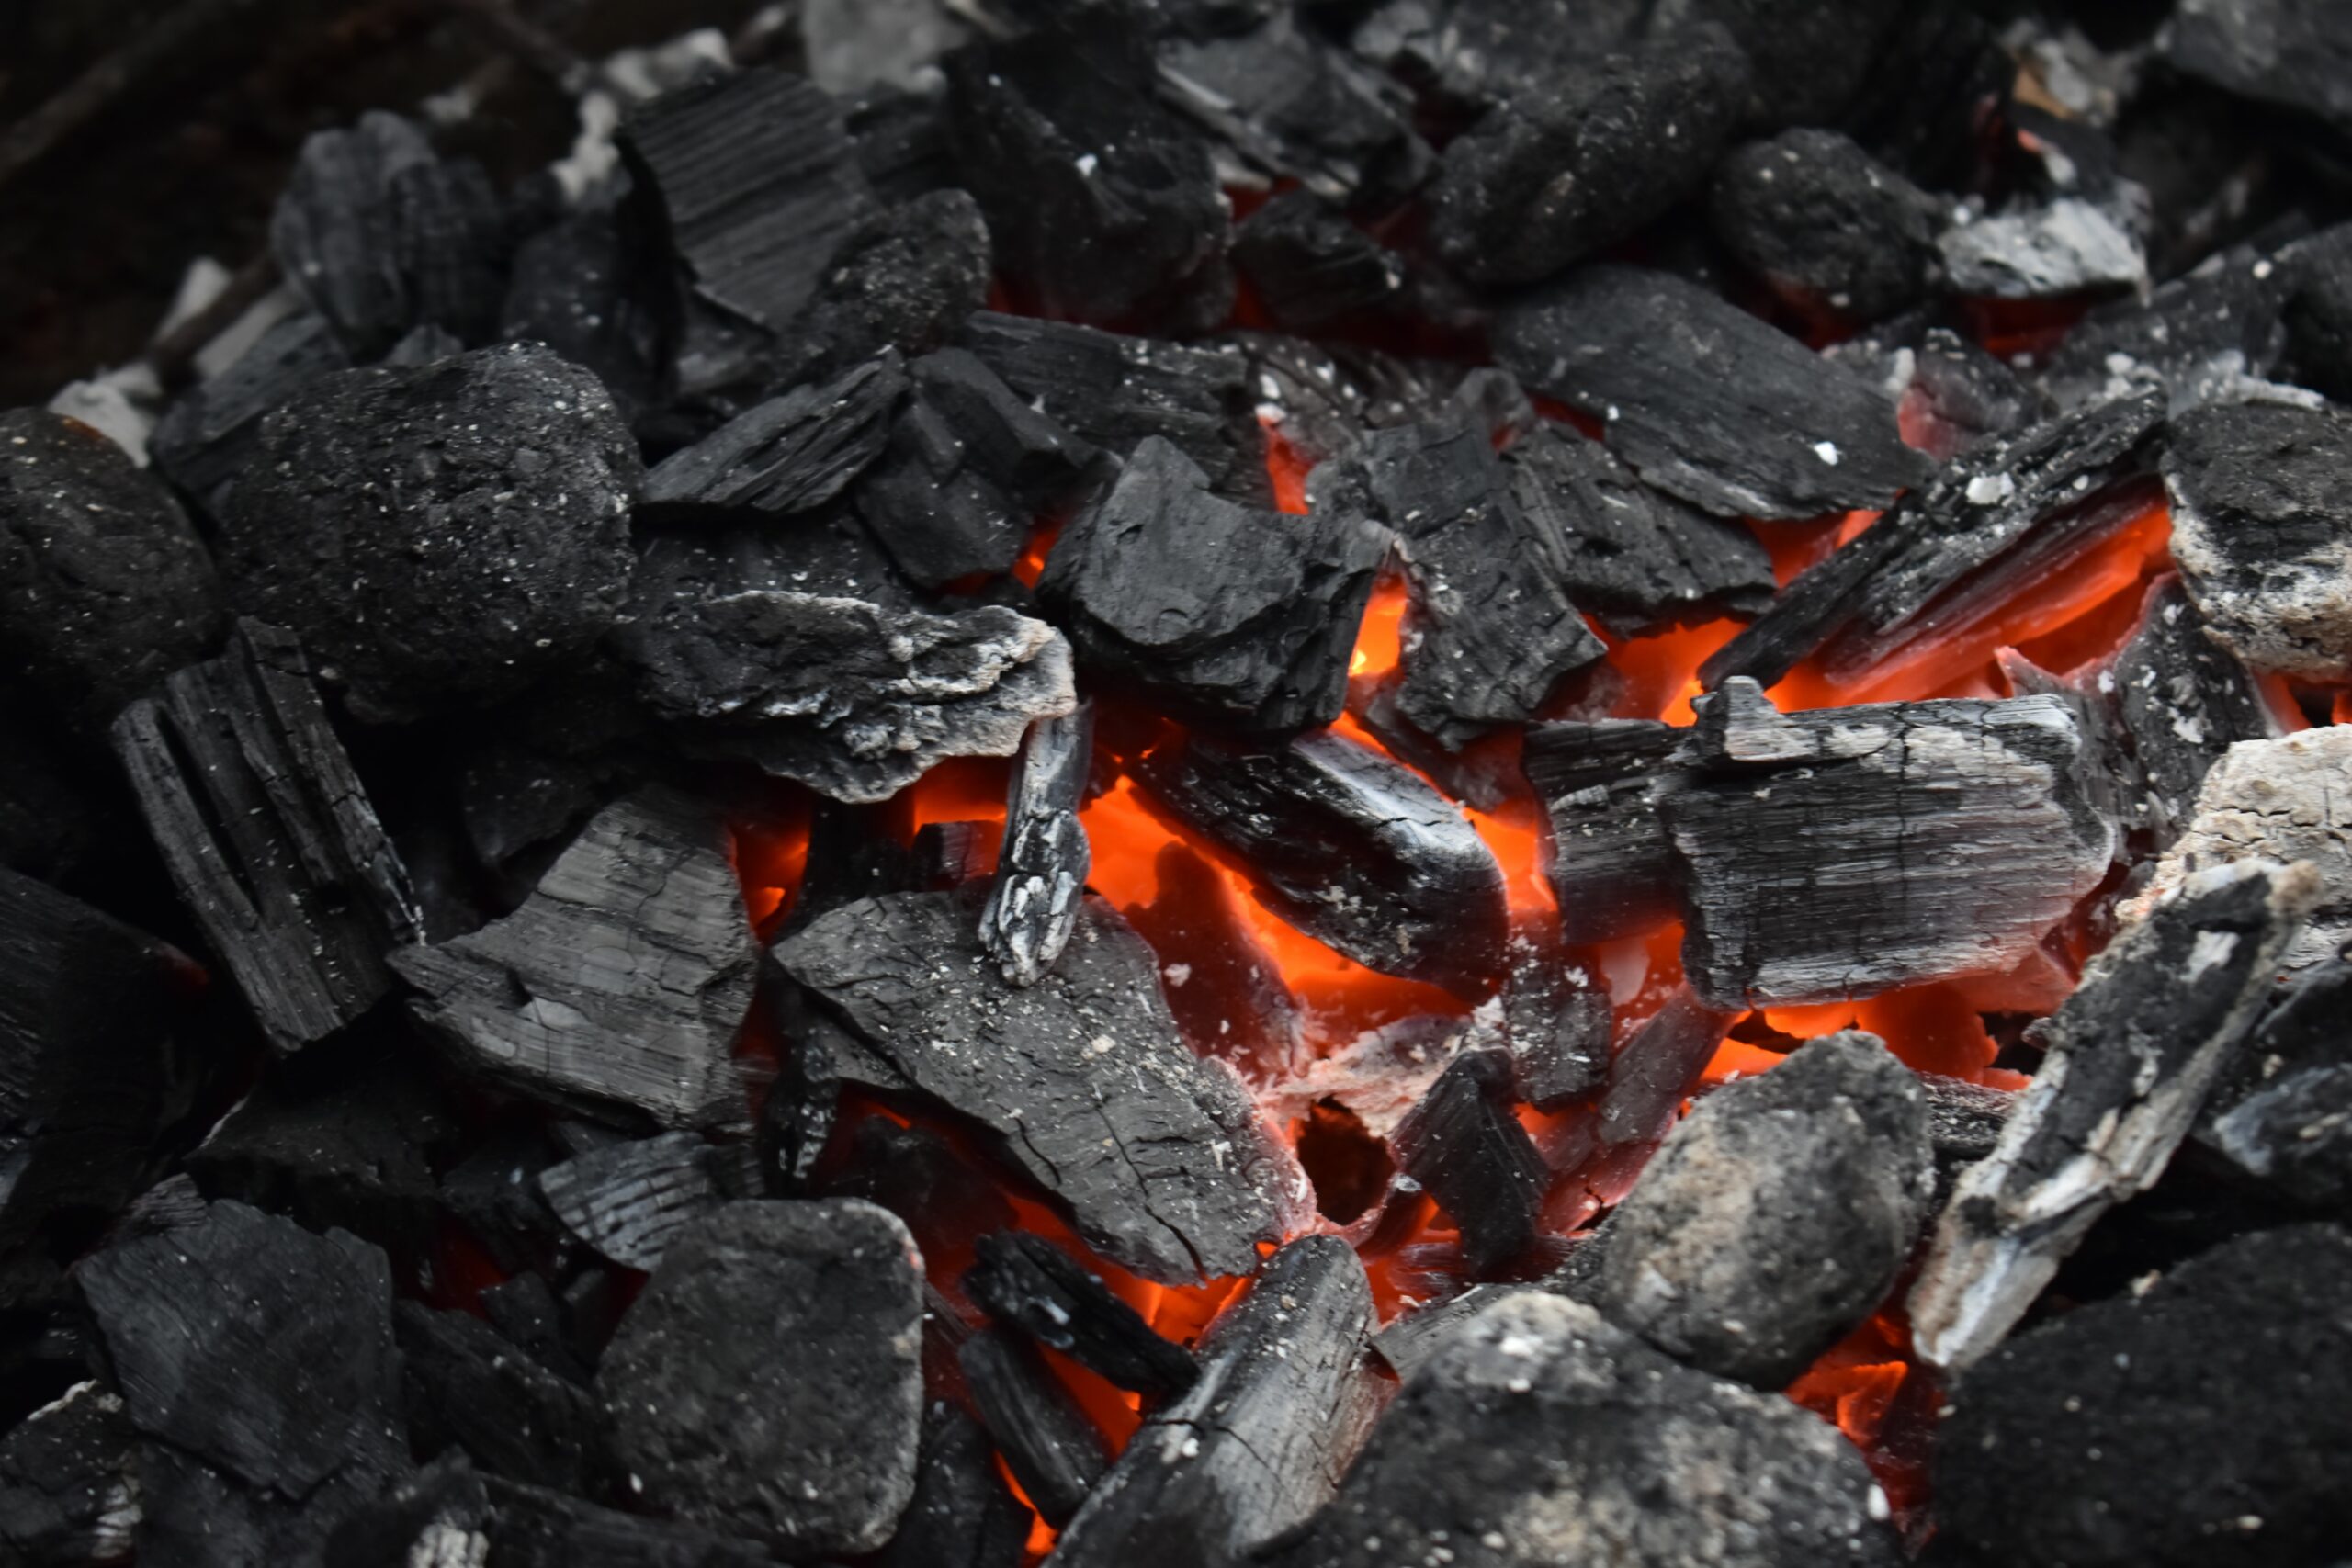 How to Exit Coal: 10 criteria for coal phase-out plans